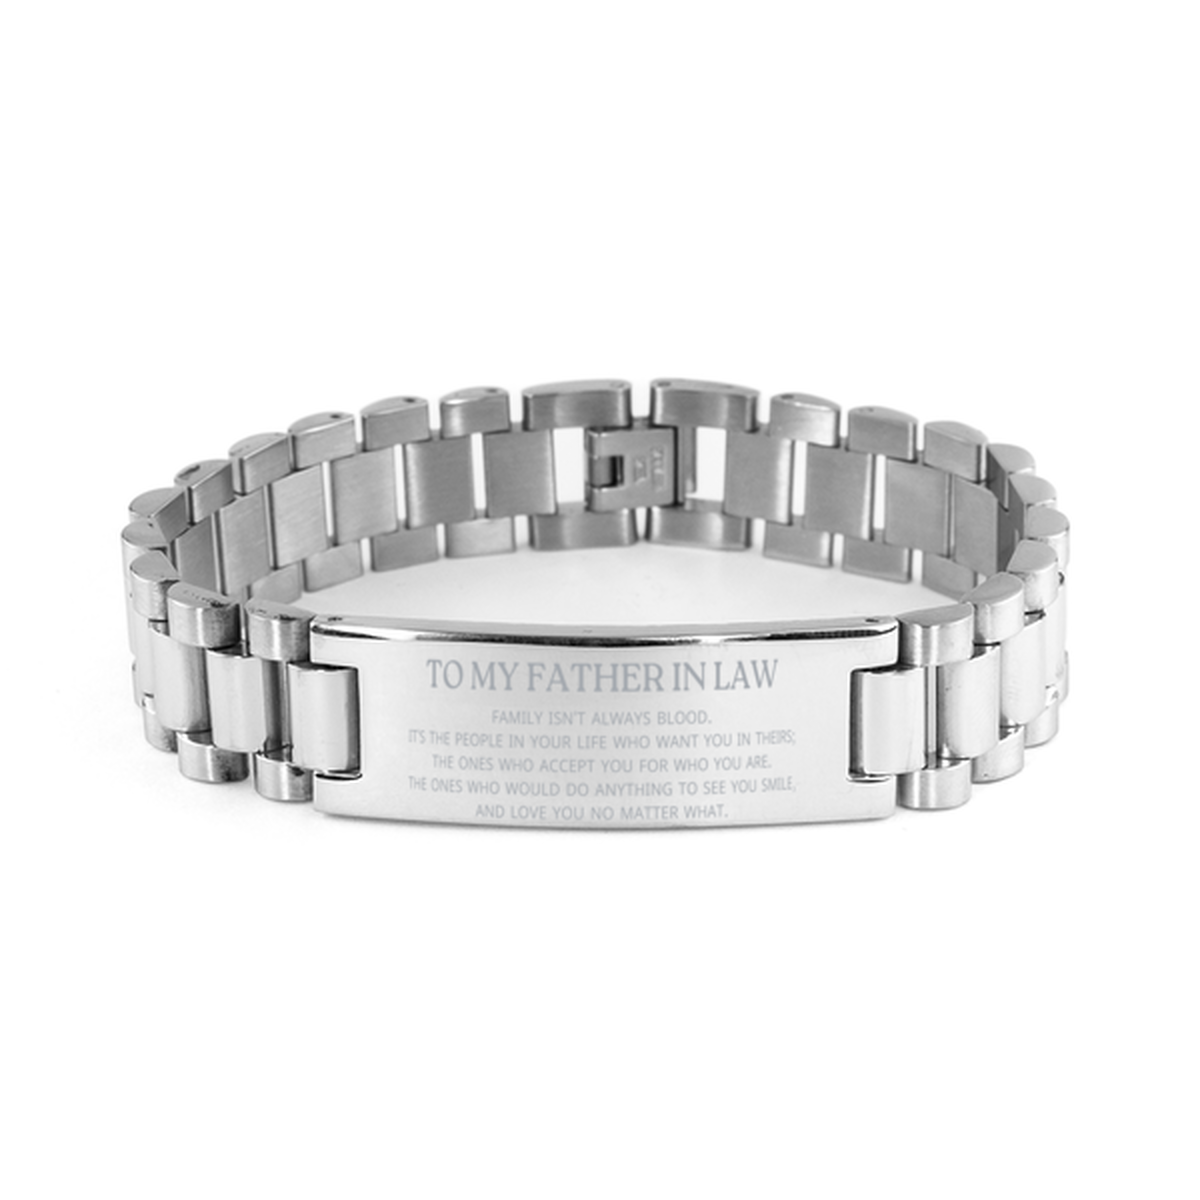 To My Father In Law Gifts, Family isn't always blood, Father In Law Ladder Stainless Steel Bracelet, Birthday Christmas Unique Present For Father In Law